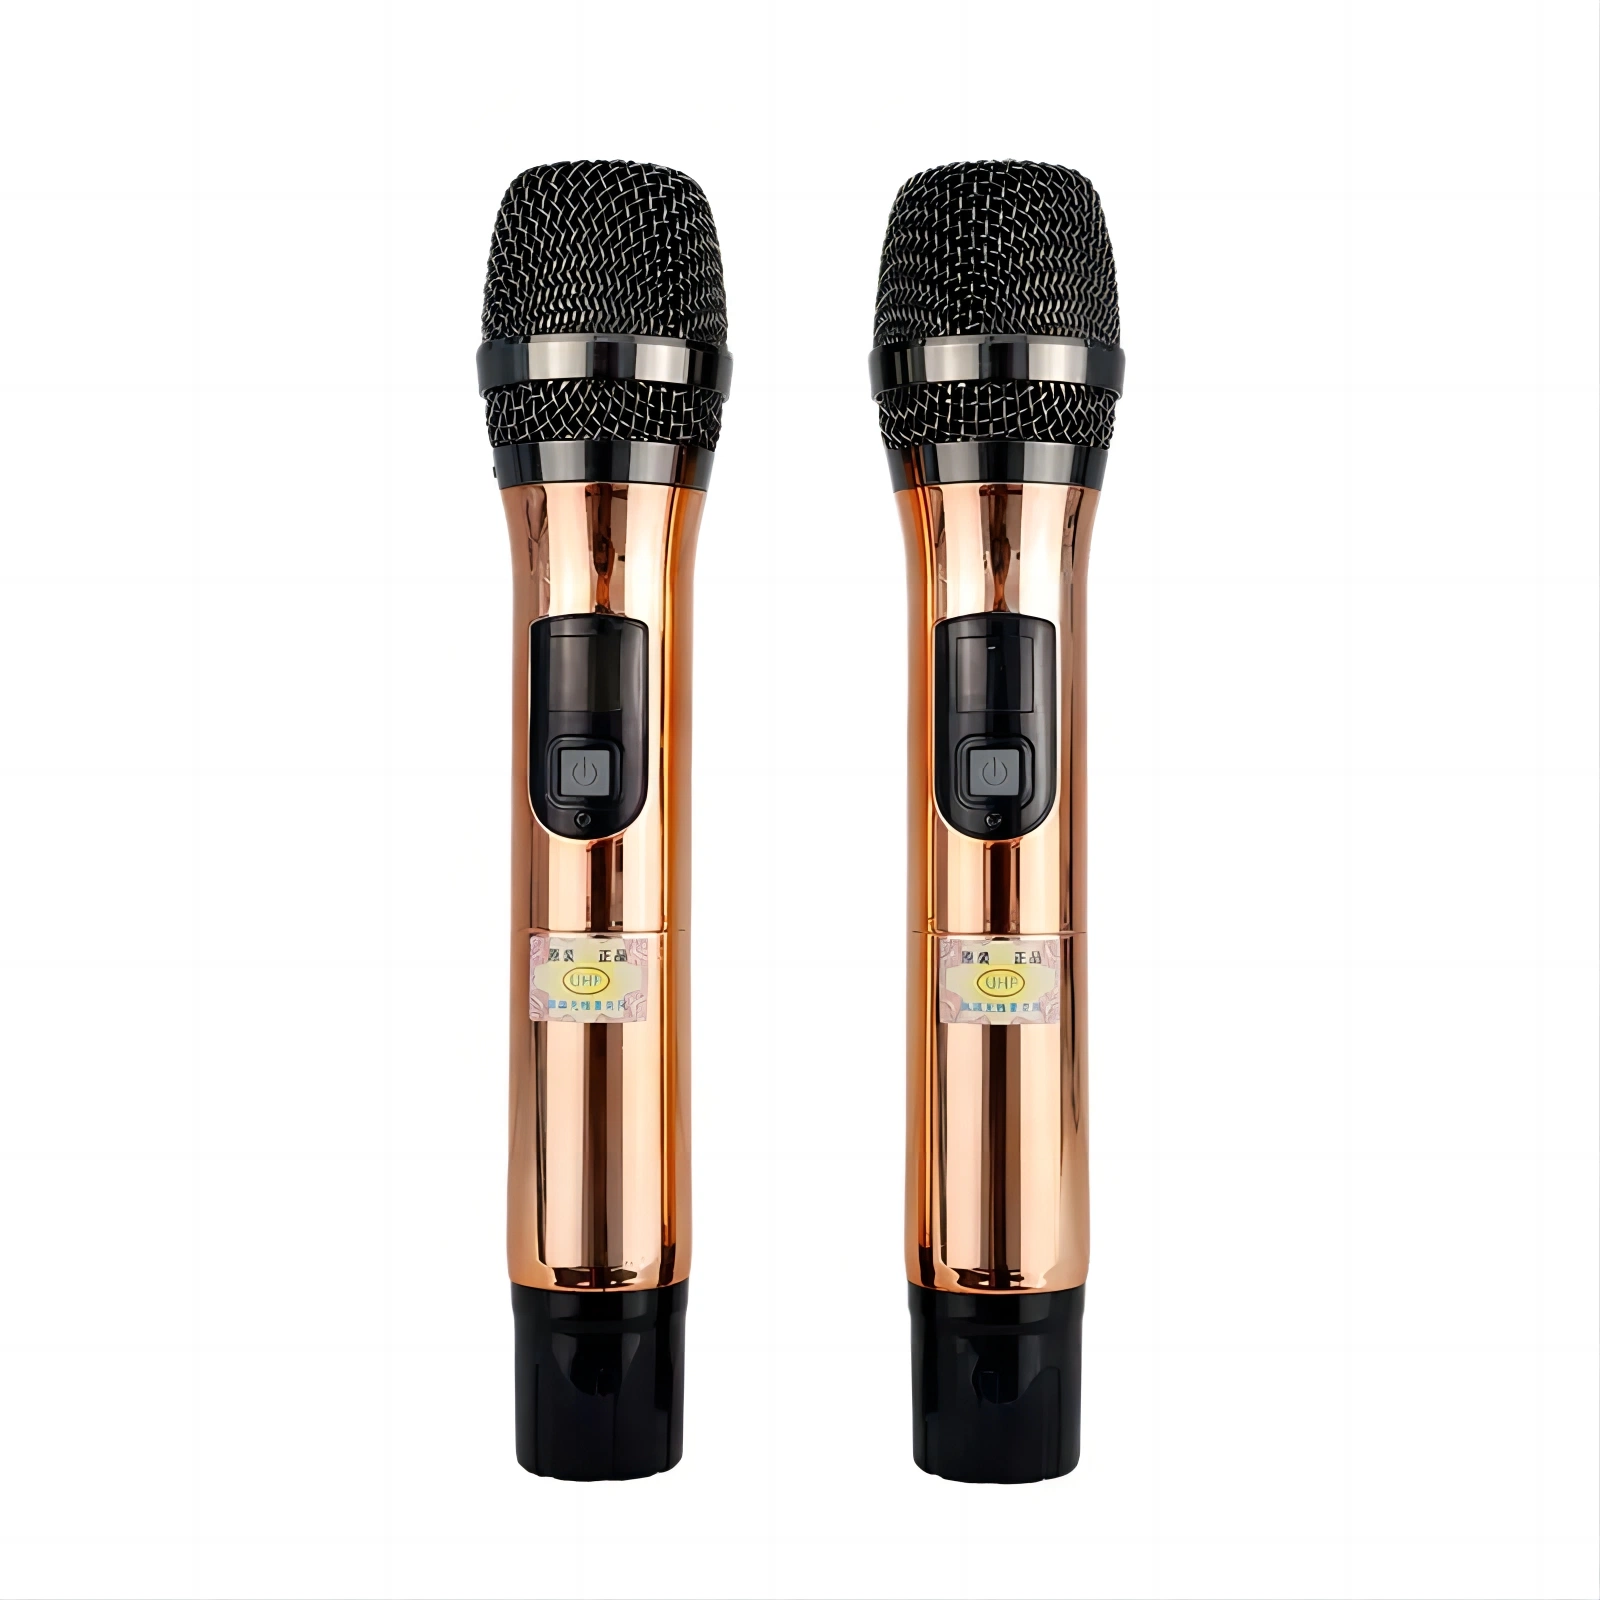 Wireless Mic UHF Studio USB Karaoke Microphone for Singing Commonly Used Accessories & Parts of Microphones